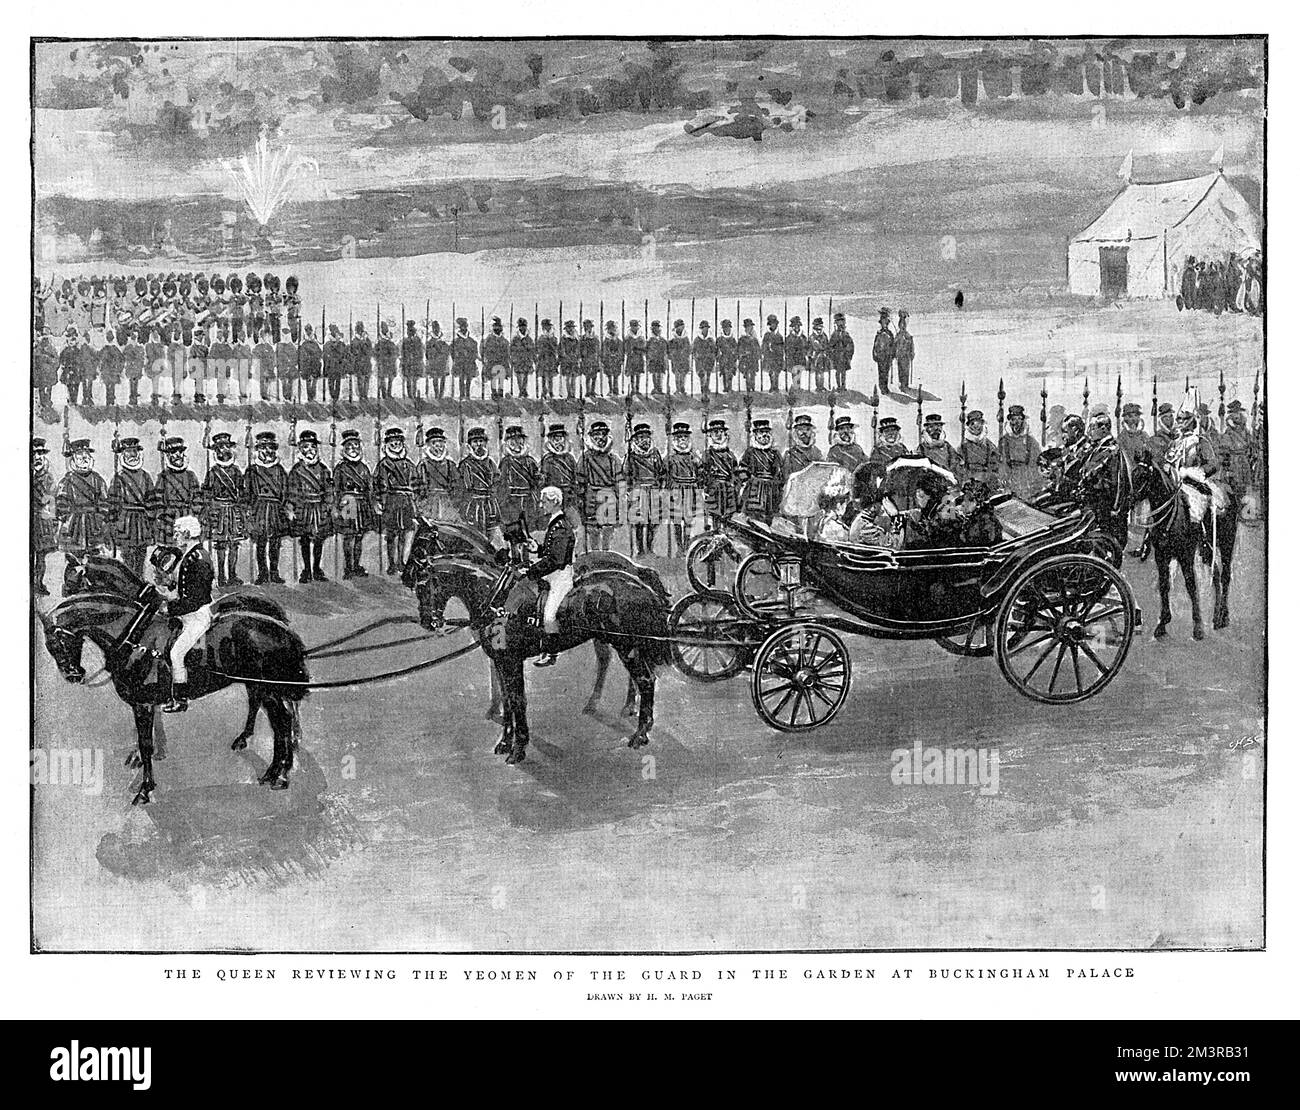 Queen Victoria in an open carriage during her Jubilee Celebrations on 20 June 1897, reviewing the Yeomen of the Guard in the garden at Buckingham Palace.      Date: 20 June 1897 Stock Photo